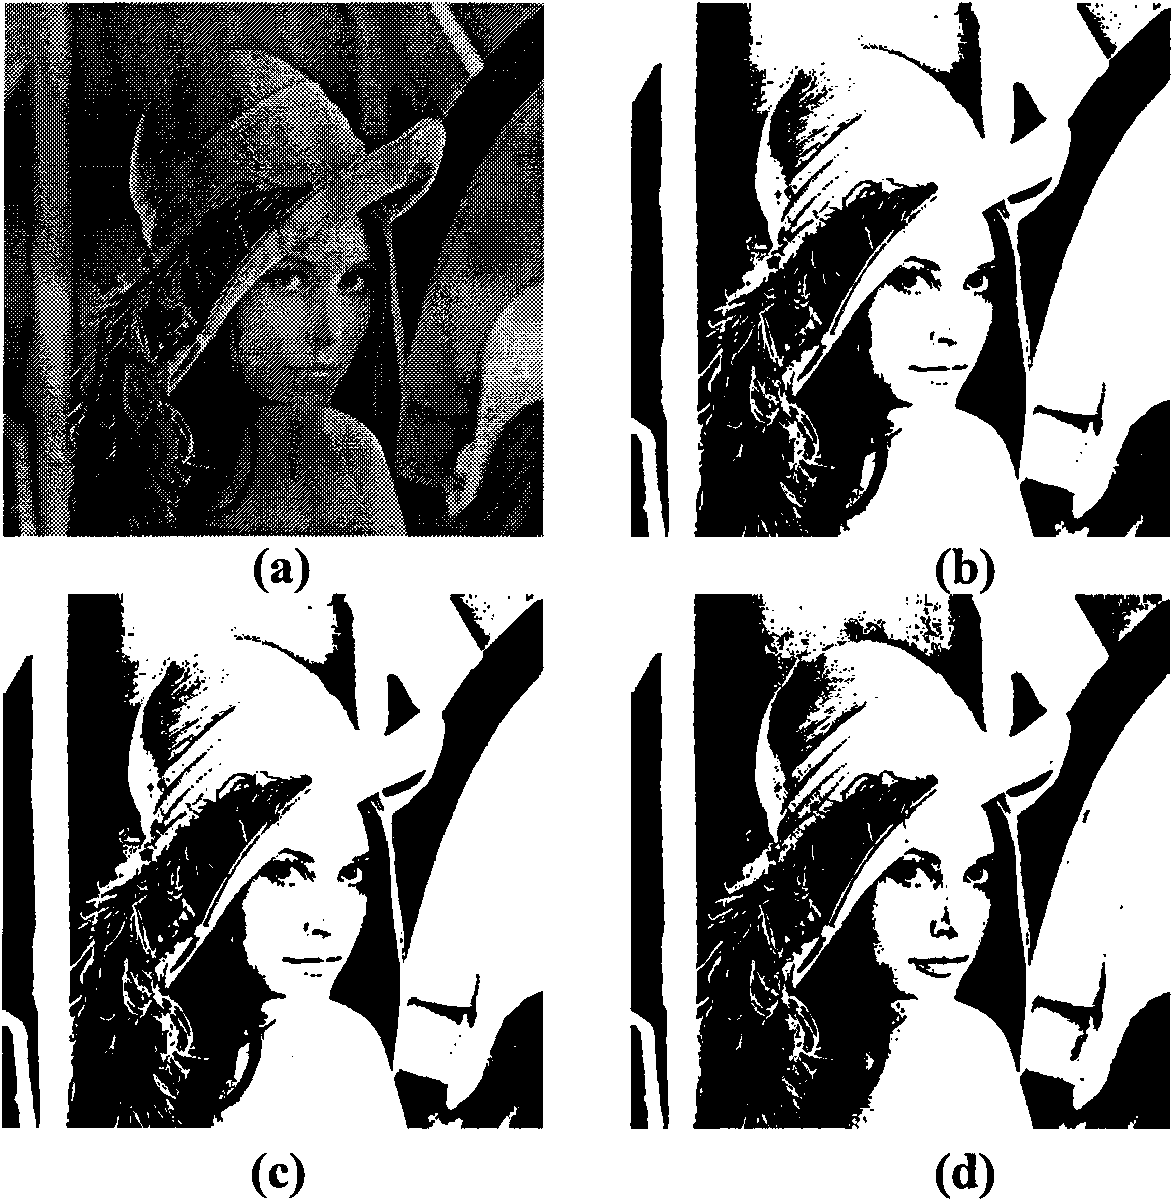 Image segmenting method based on improvement of intersecting visual cortical model